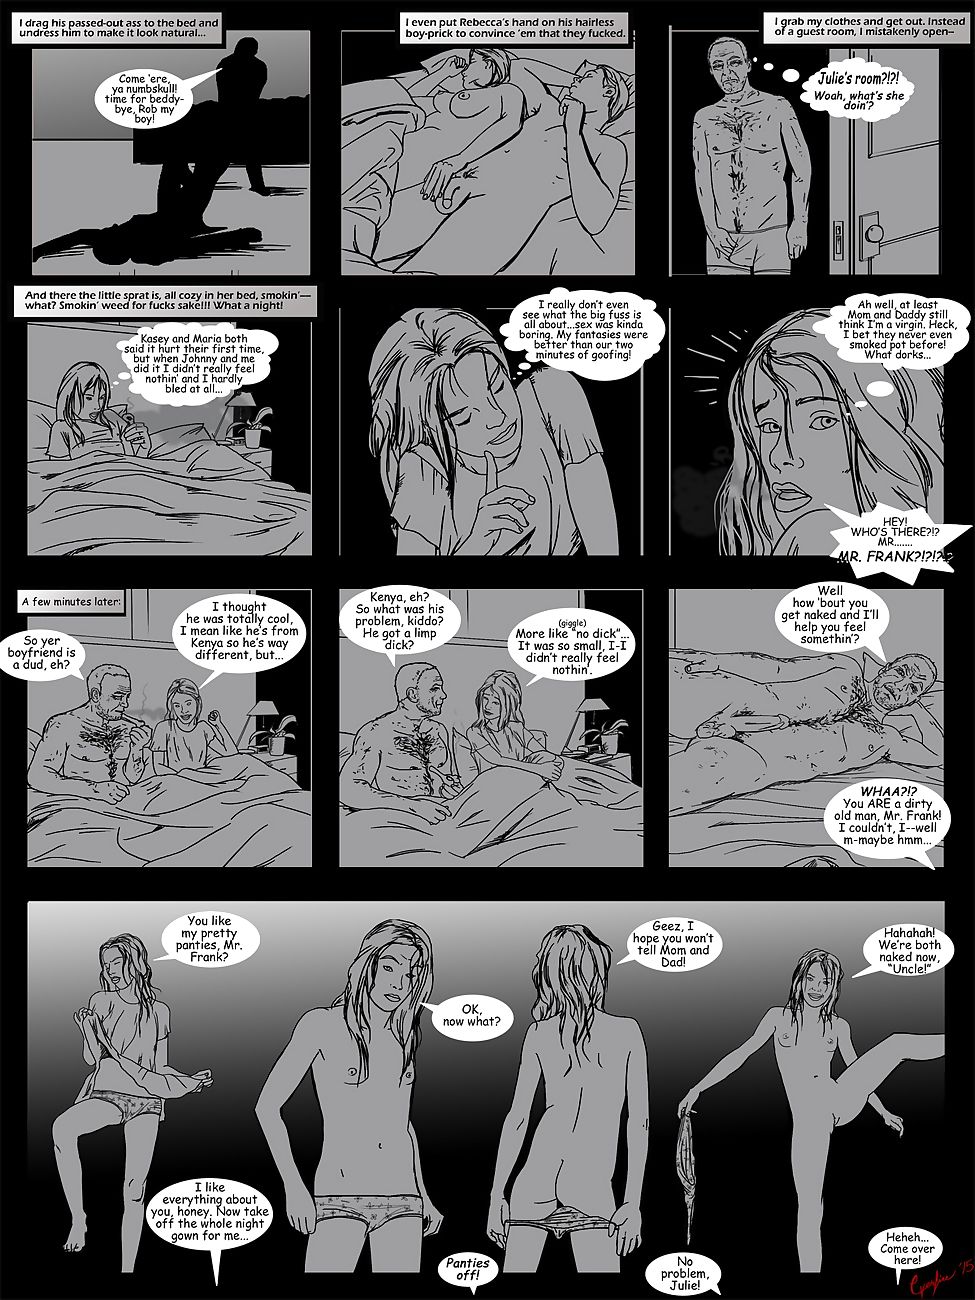 All In - part 2 page 1